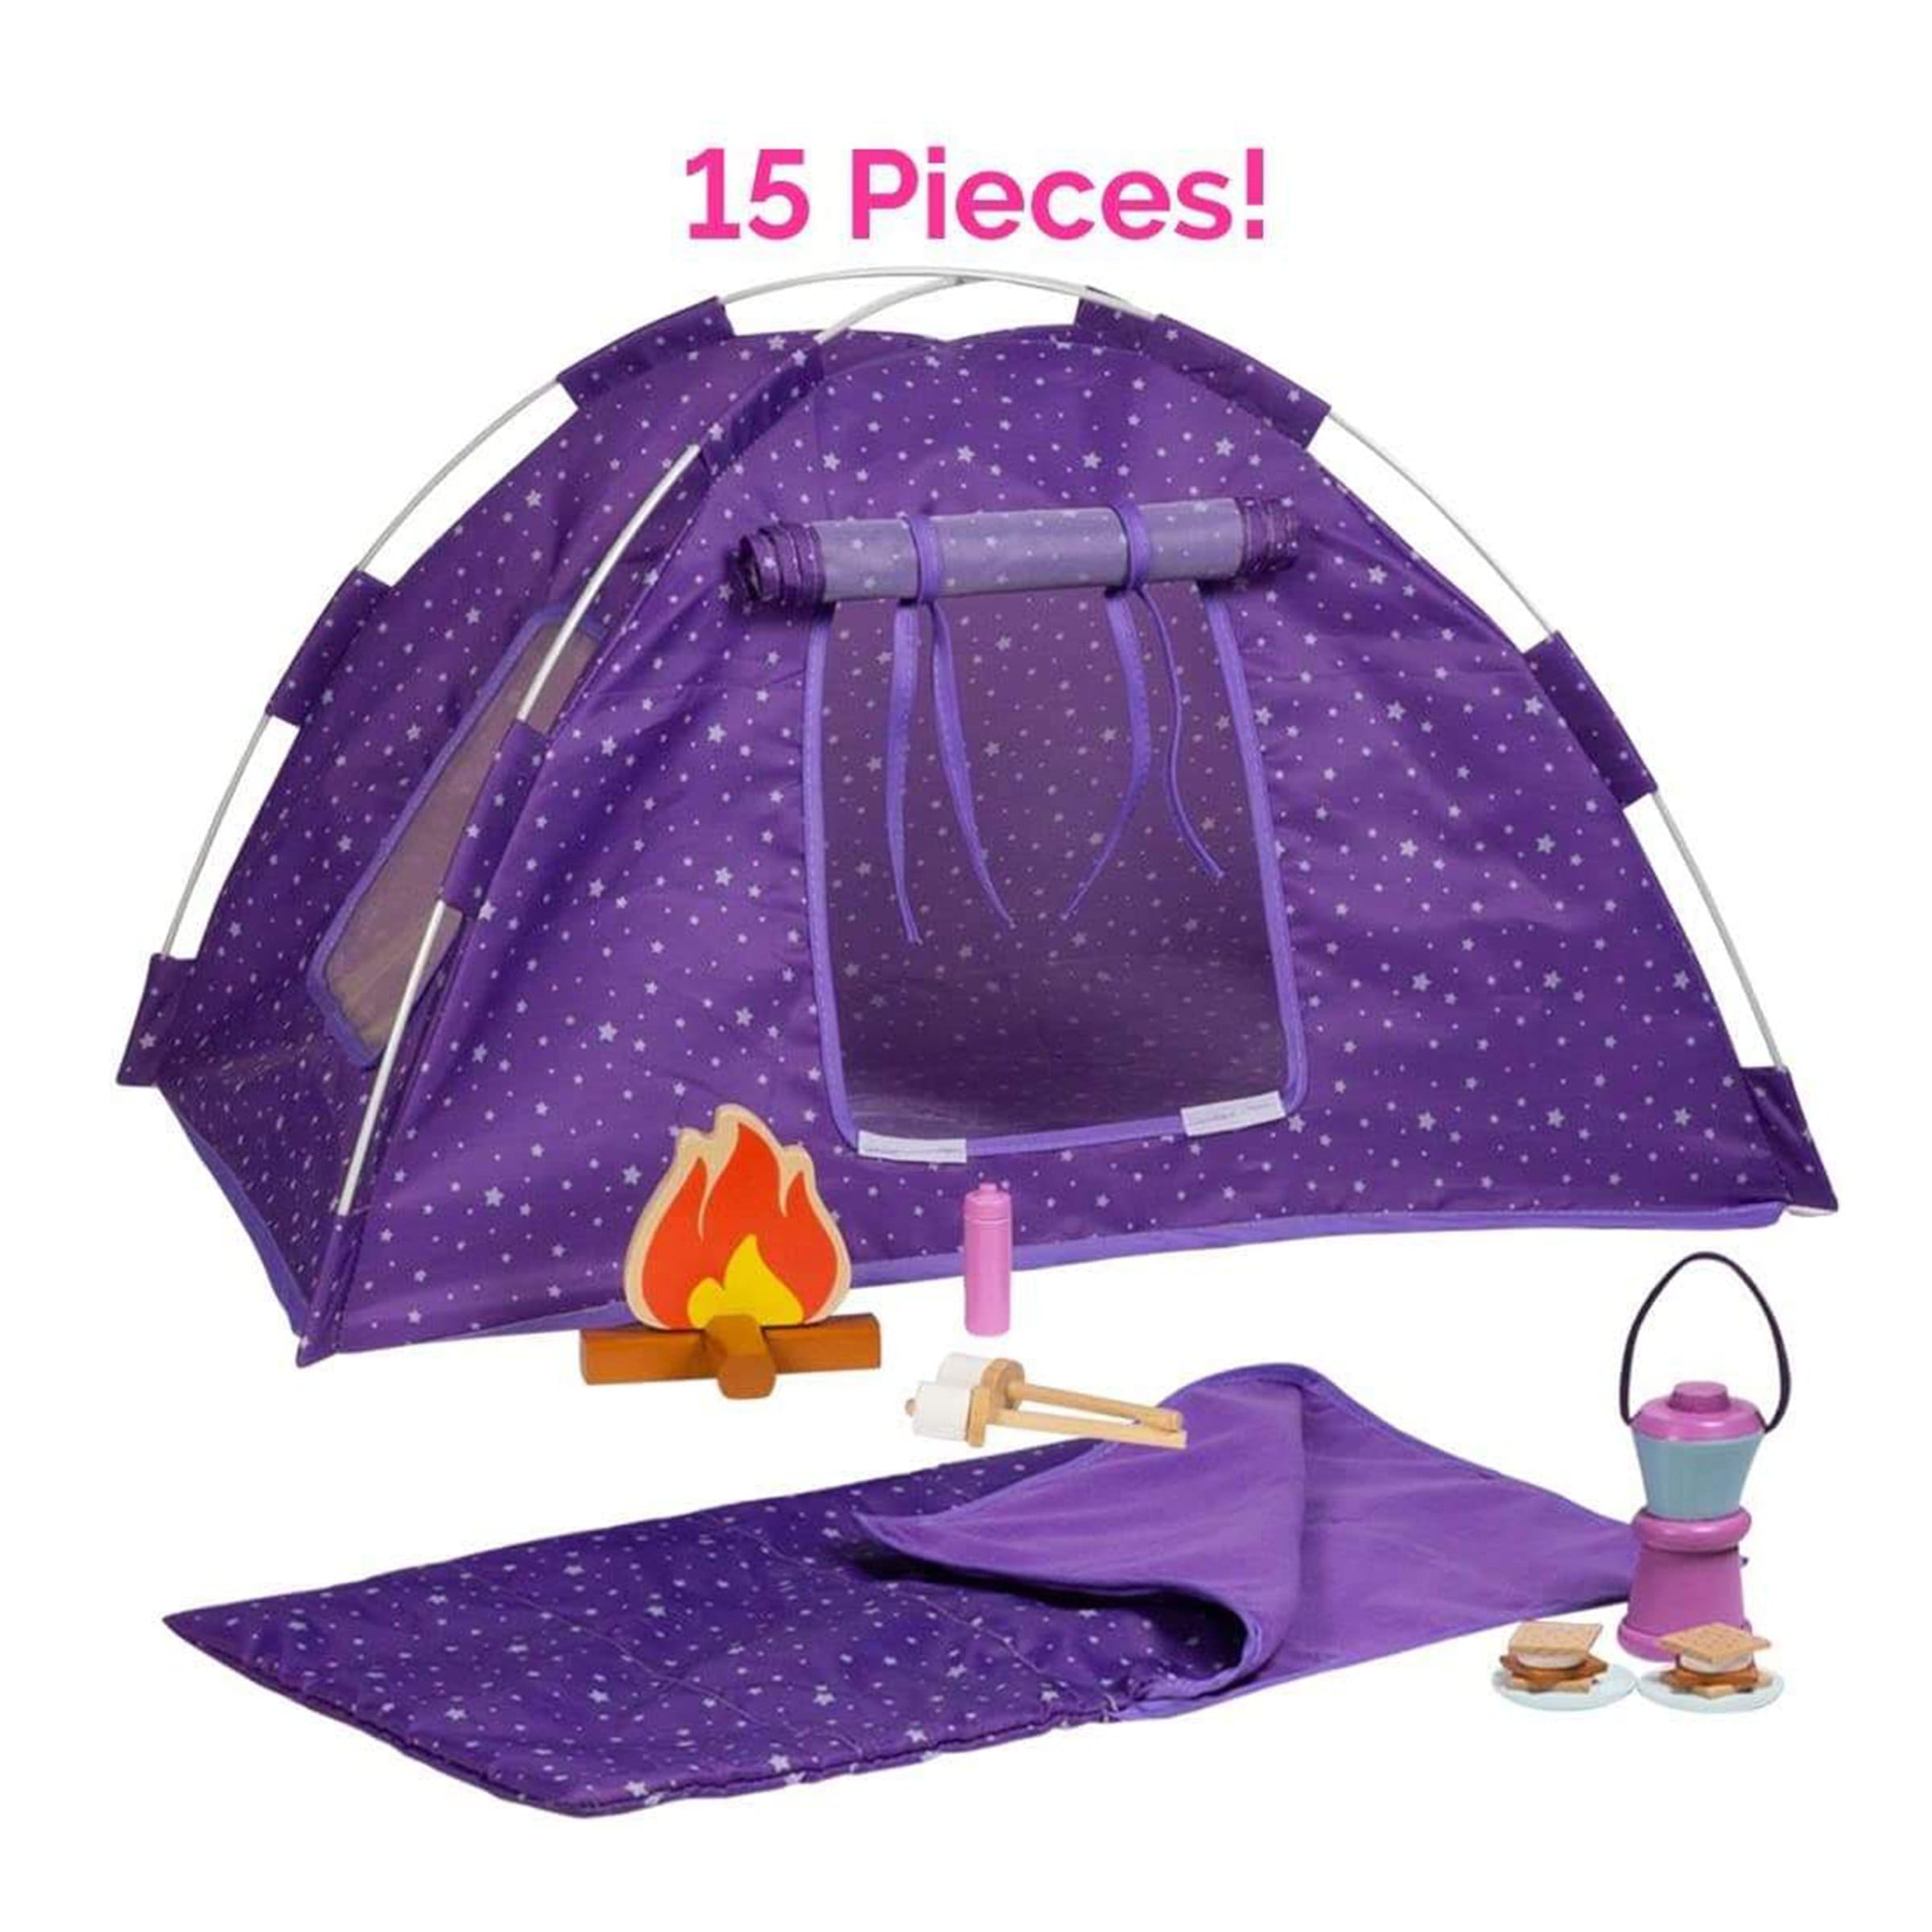 Amazing World 18 inch Doll Accessories Camping Wooden Play Set